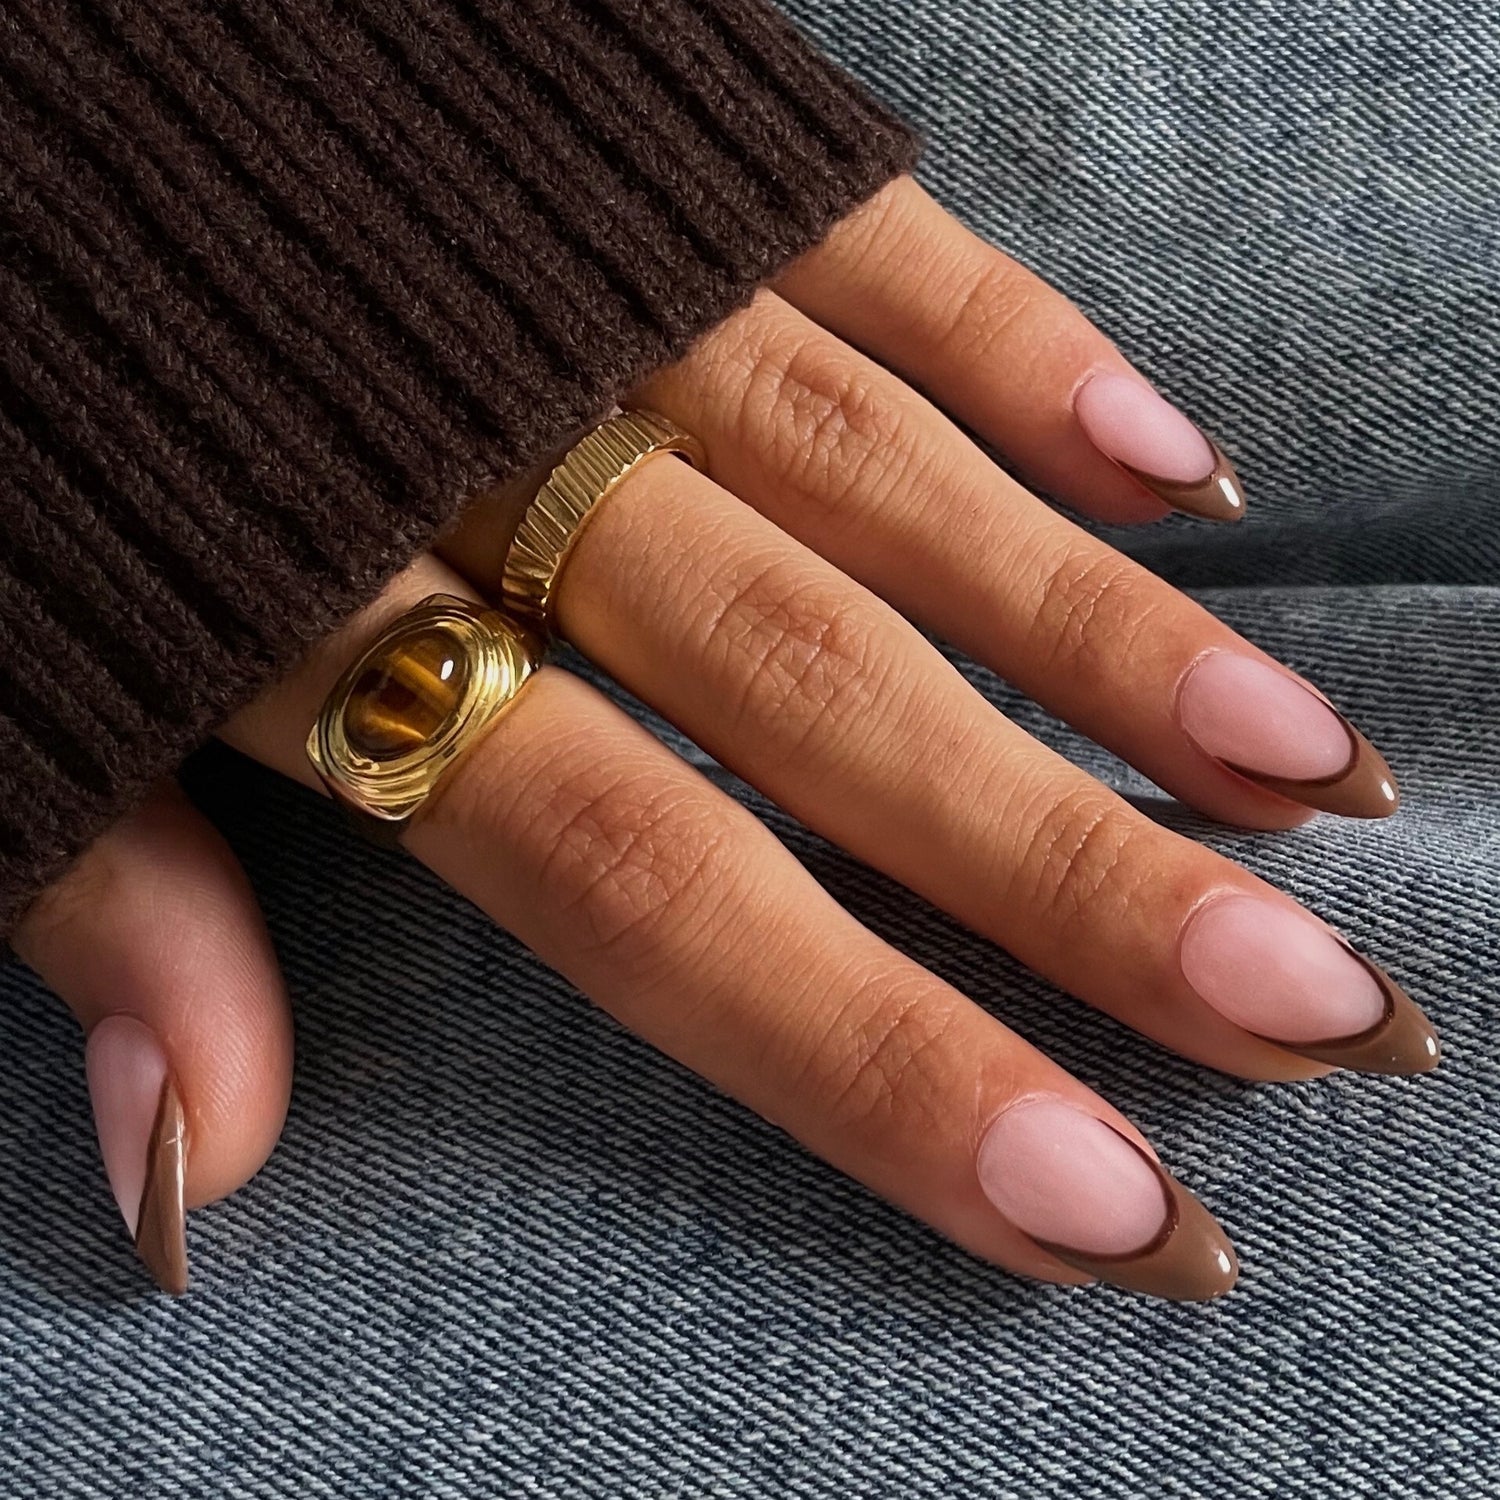 Phoebe Summer Nails Chocolate Brown Autumn Manicure